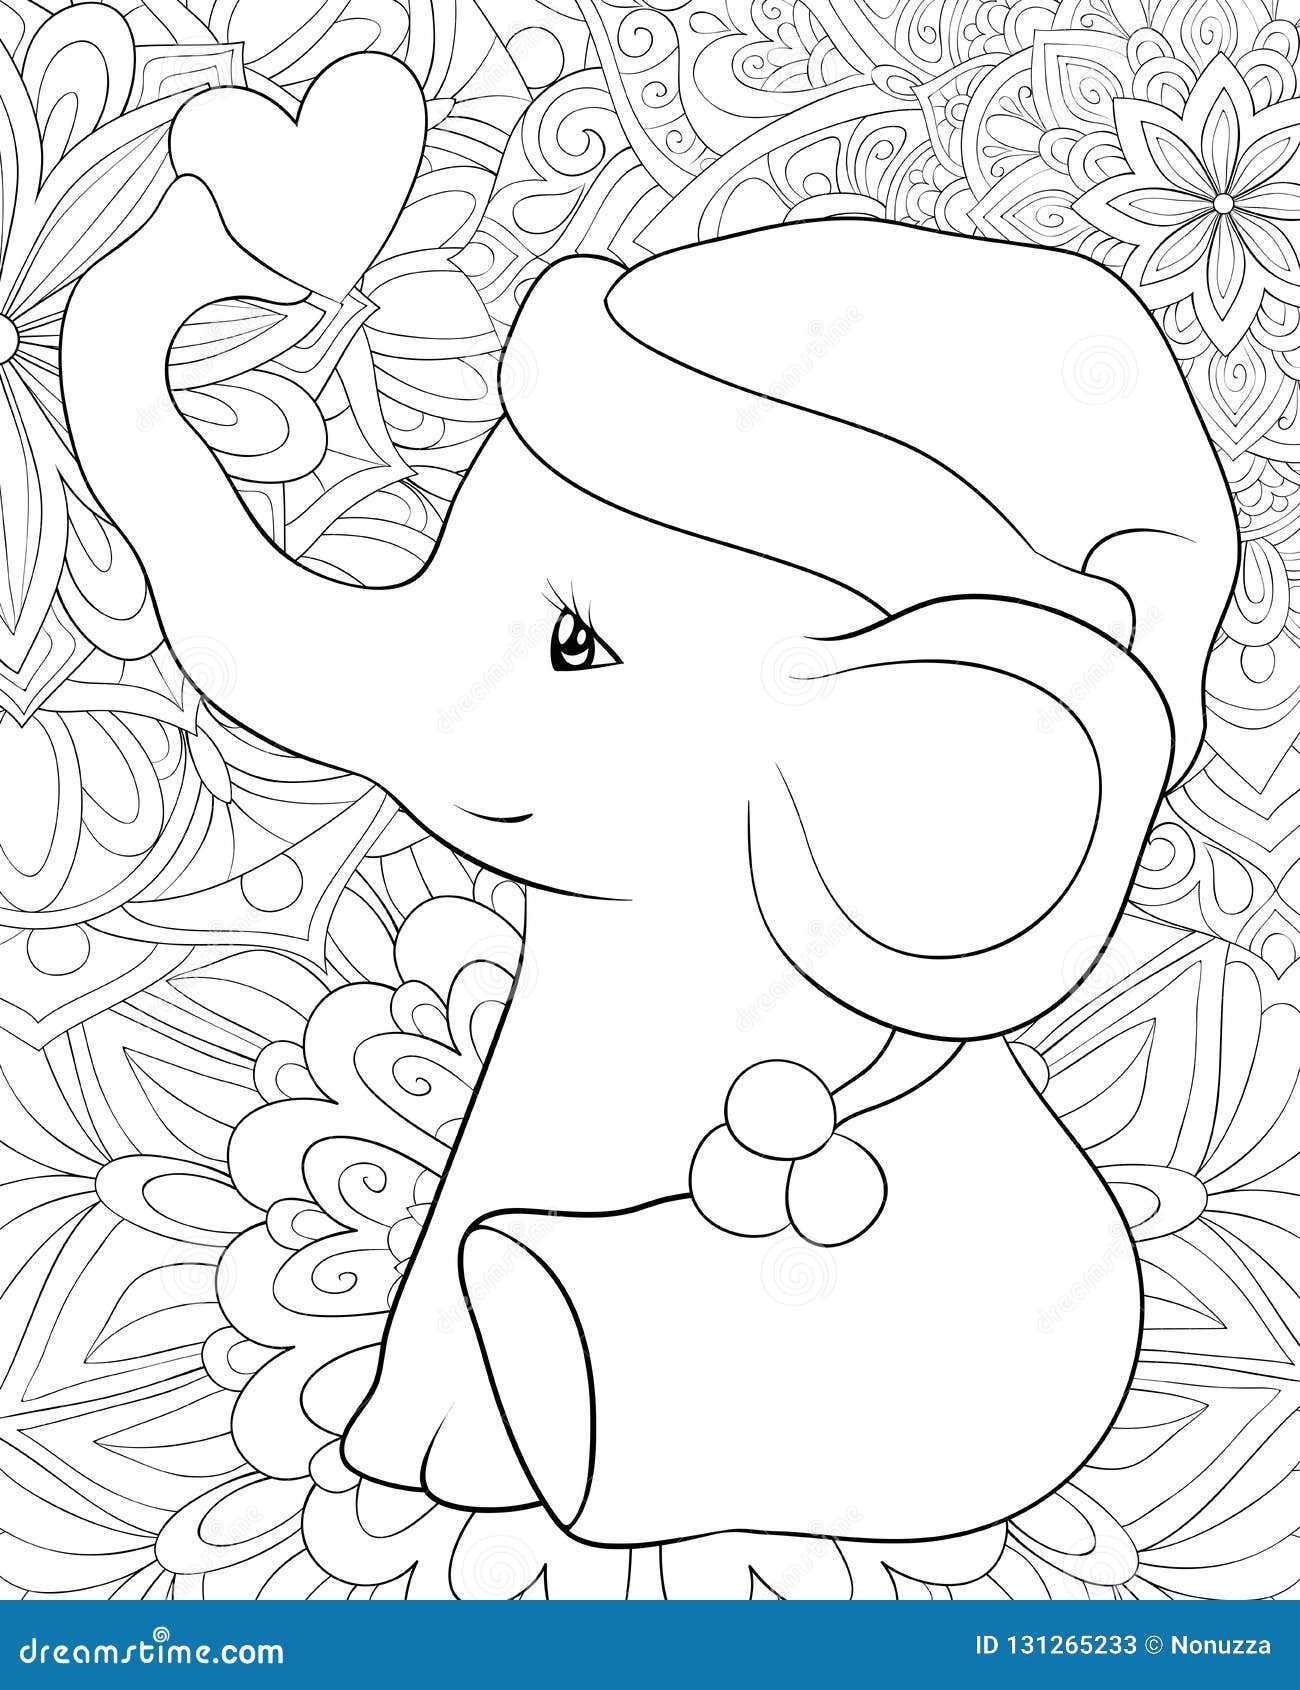 Adult Coloring Book,page a Cute Elephant Image for Relaxing Activity.Zen  Art Style Illustration for Print. Stock Vector - Illustration of flower,  outline: 131265378